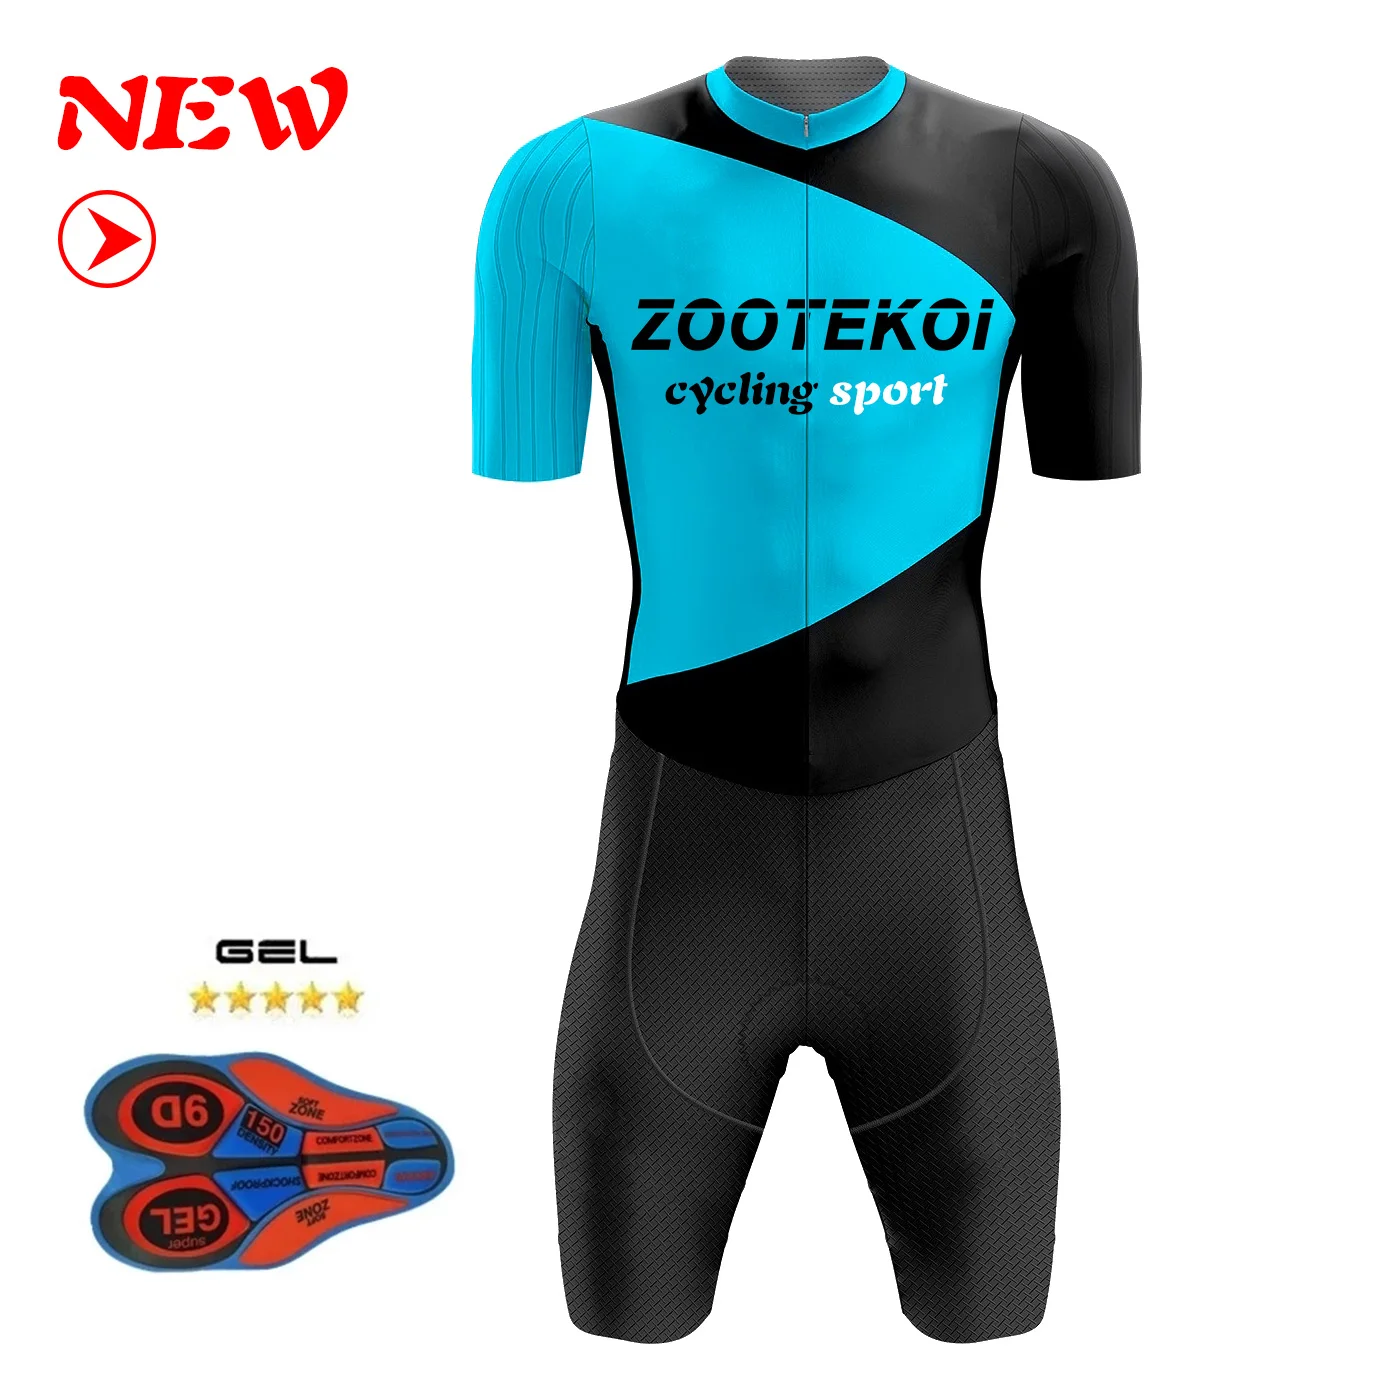 

ZOOTEKOI new men's bicycle mountain bike short-sleeved tight-fitting racing suit 100% championship riding experience cycling sui